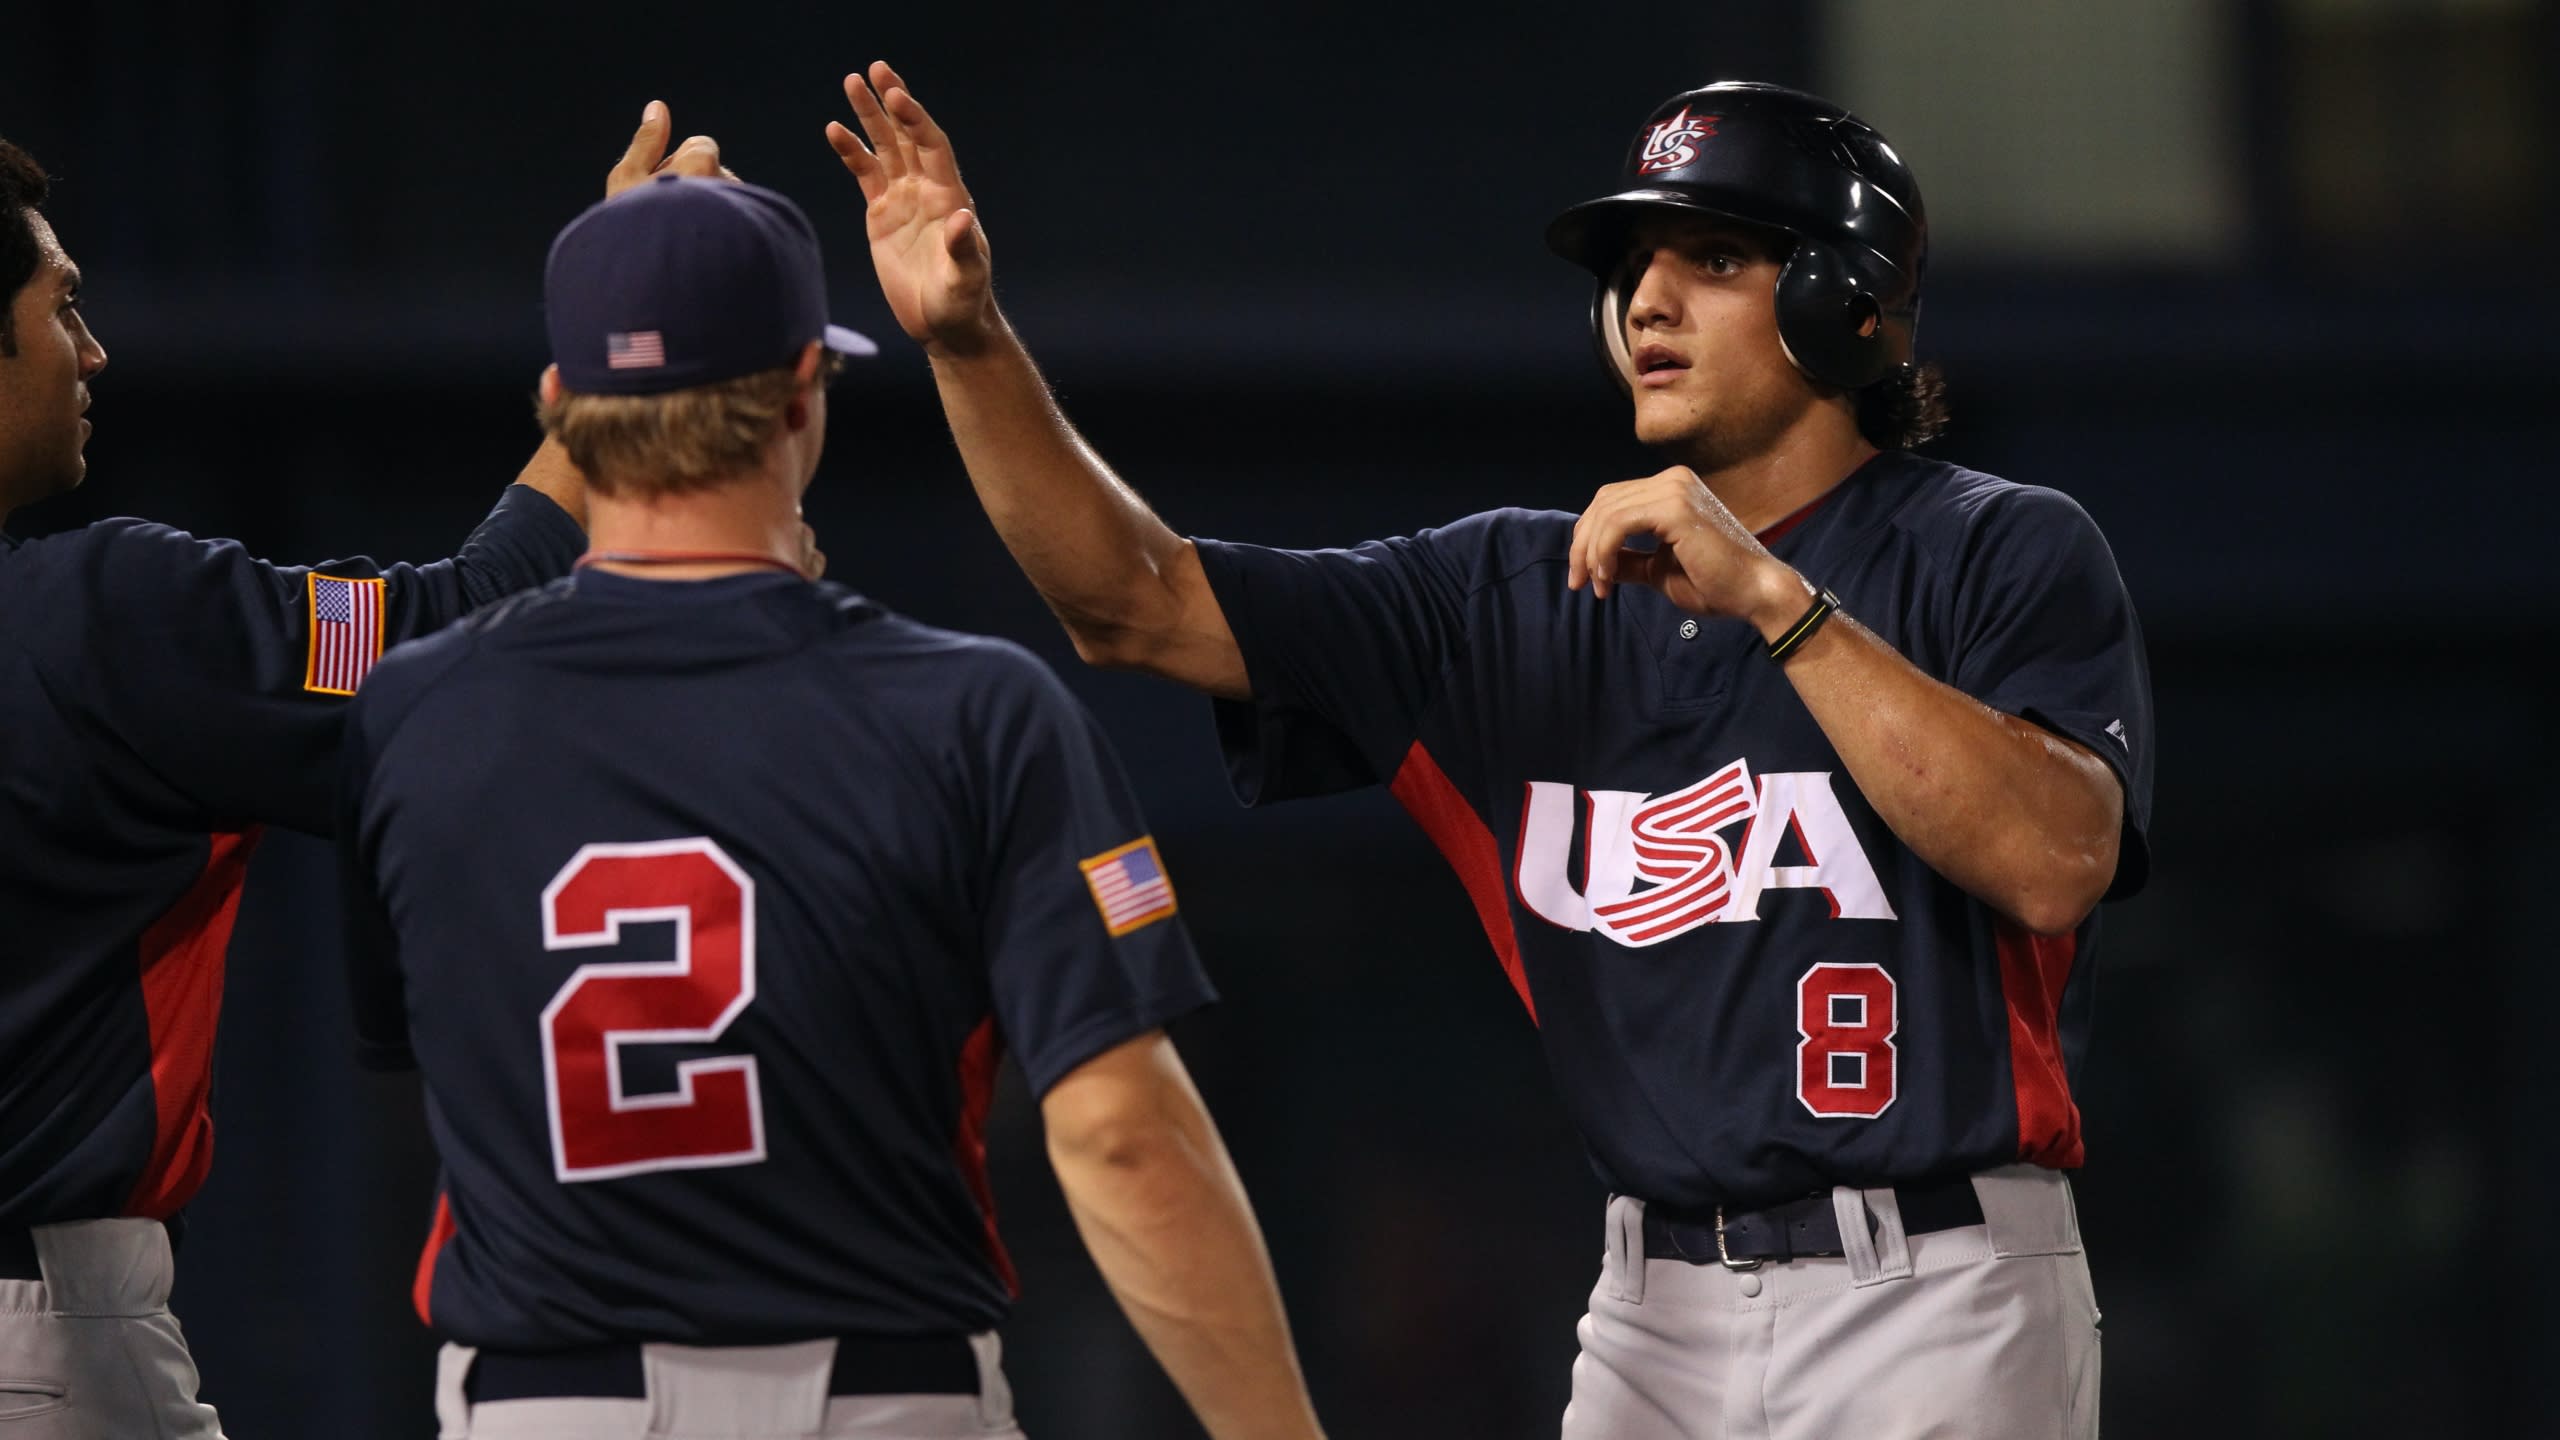 USA crush Puerto Rico 8-0 to clinch first ever World Baseball Classic title, World Baseball Classic